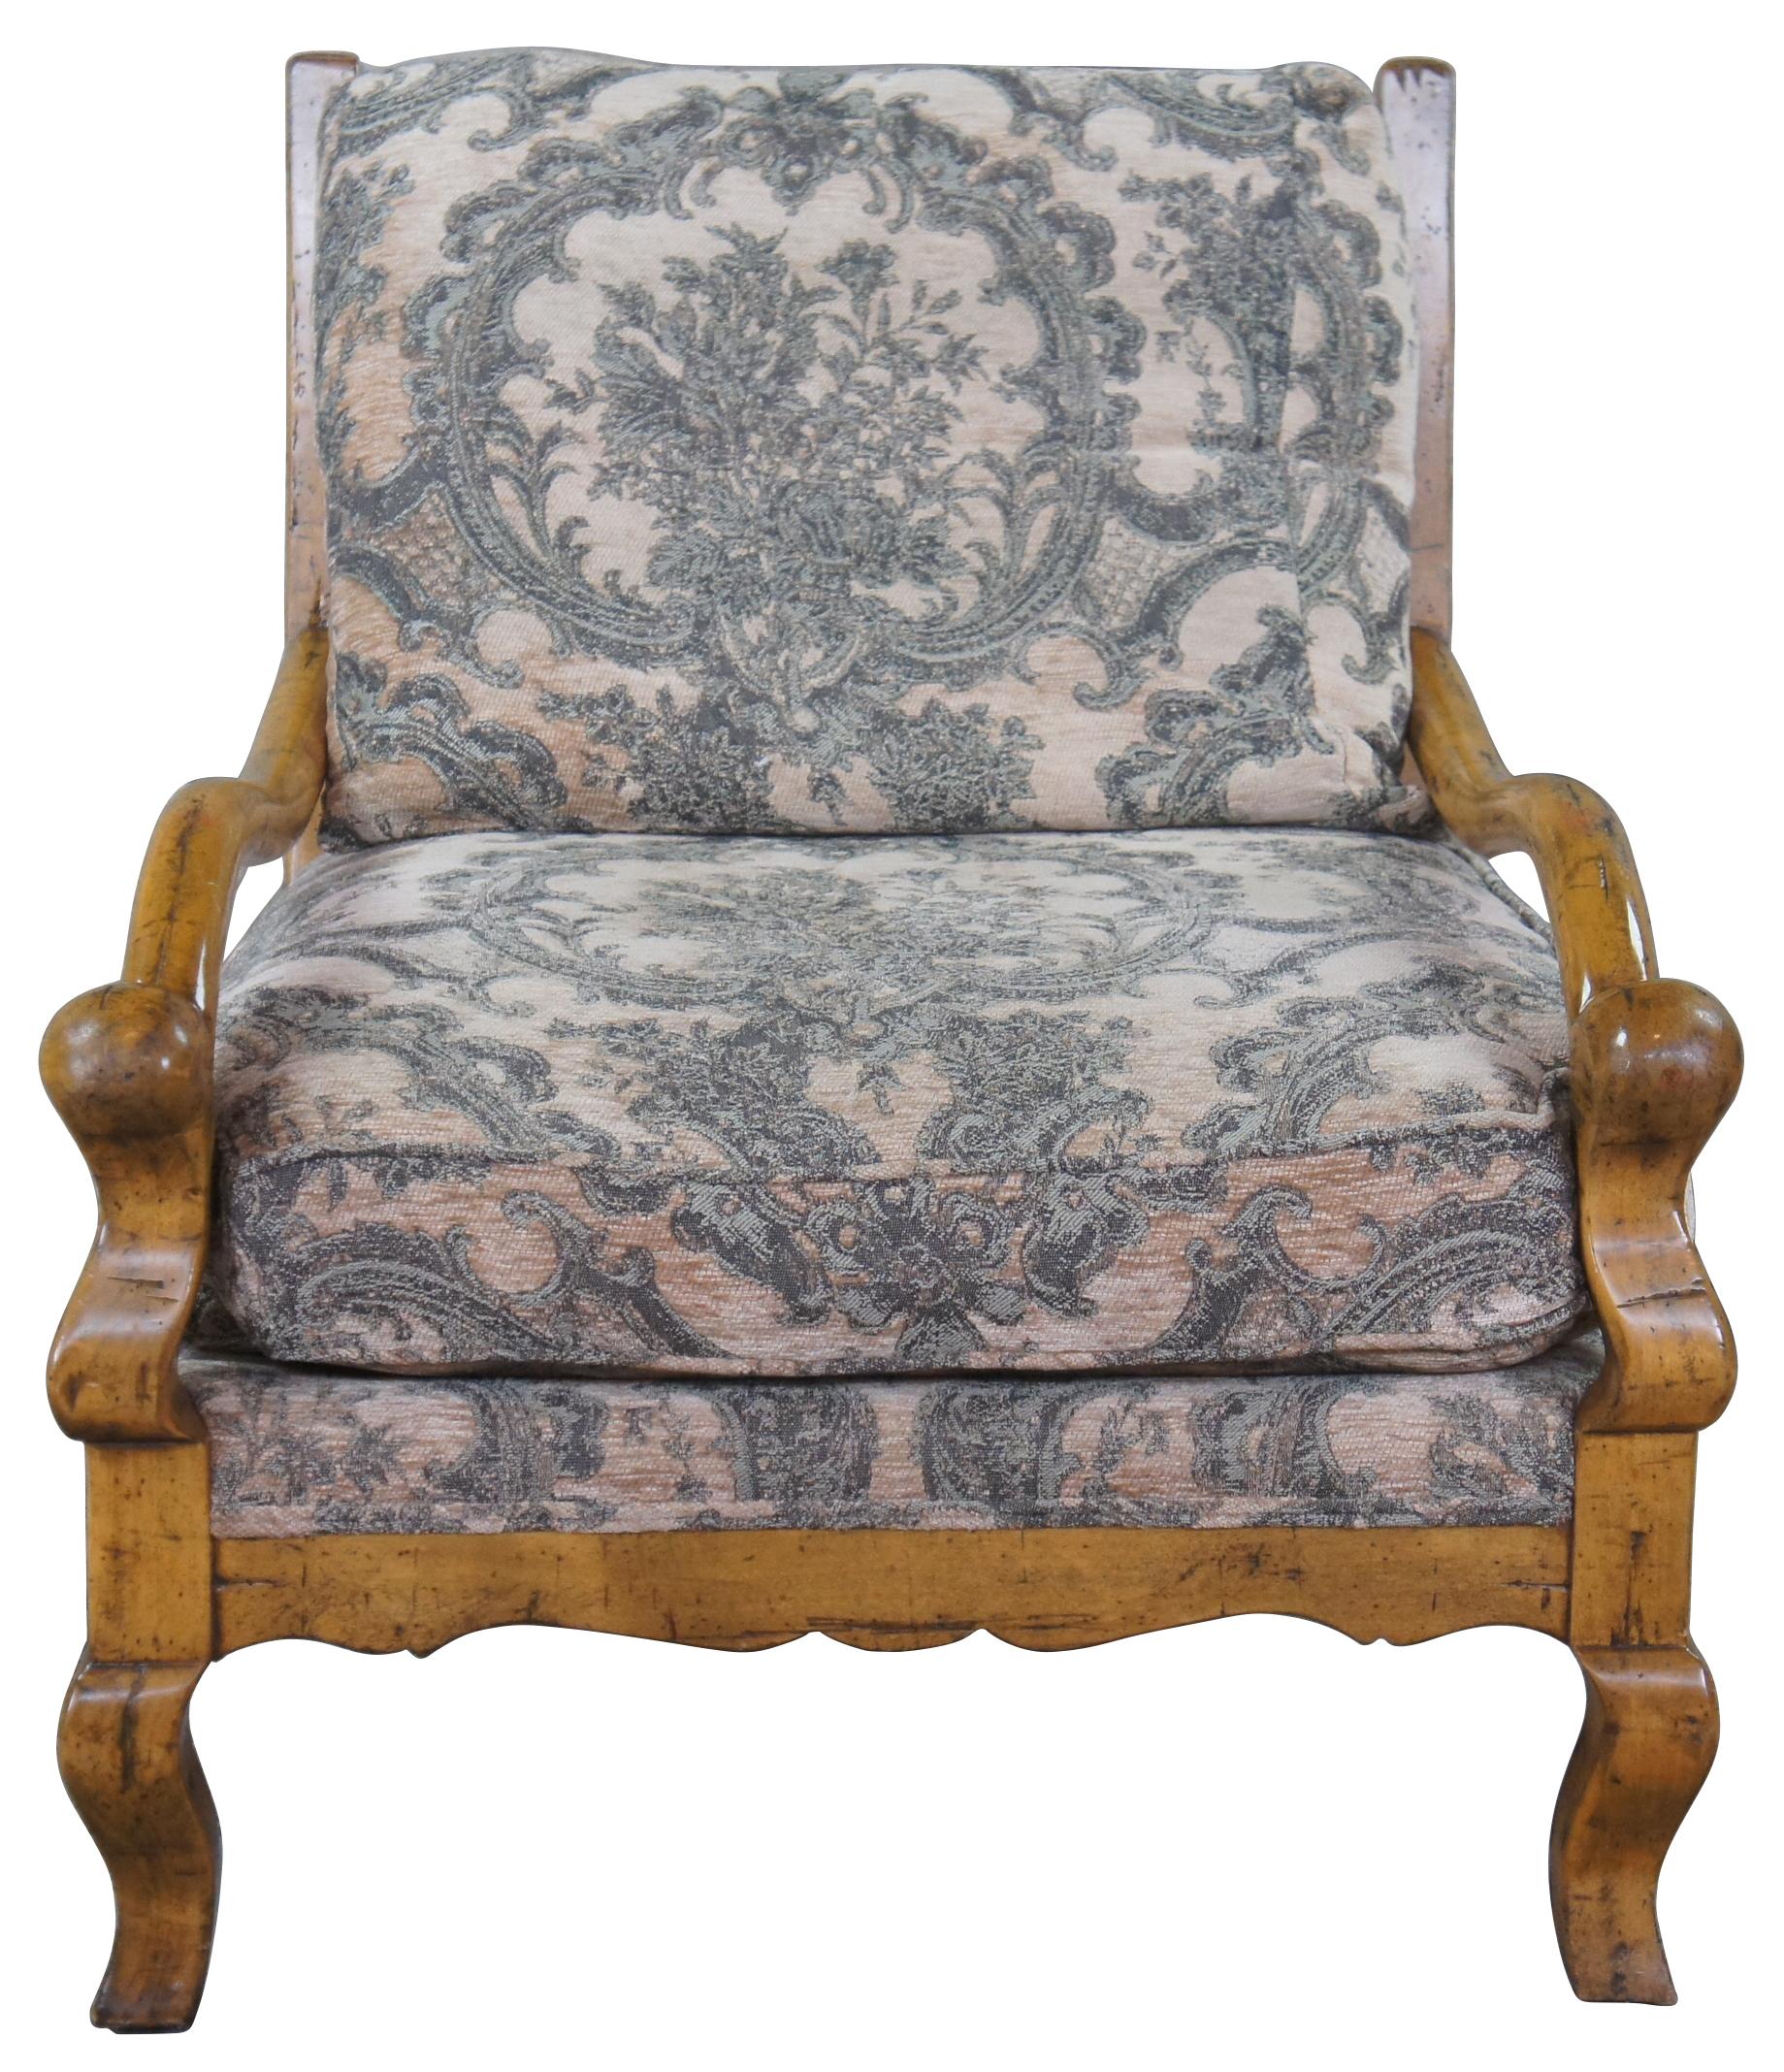 Guy Chaddock upholstery collection knuckle lound chair, UC3001. Features a distresssed hardwood frame with smooth sloping arms, ladderback, serpentine apron and cabriole legs. Upholstered in a brocade style fabric with matching throw pillow.
 